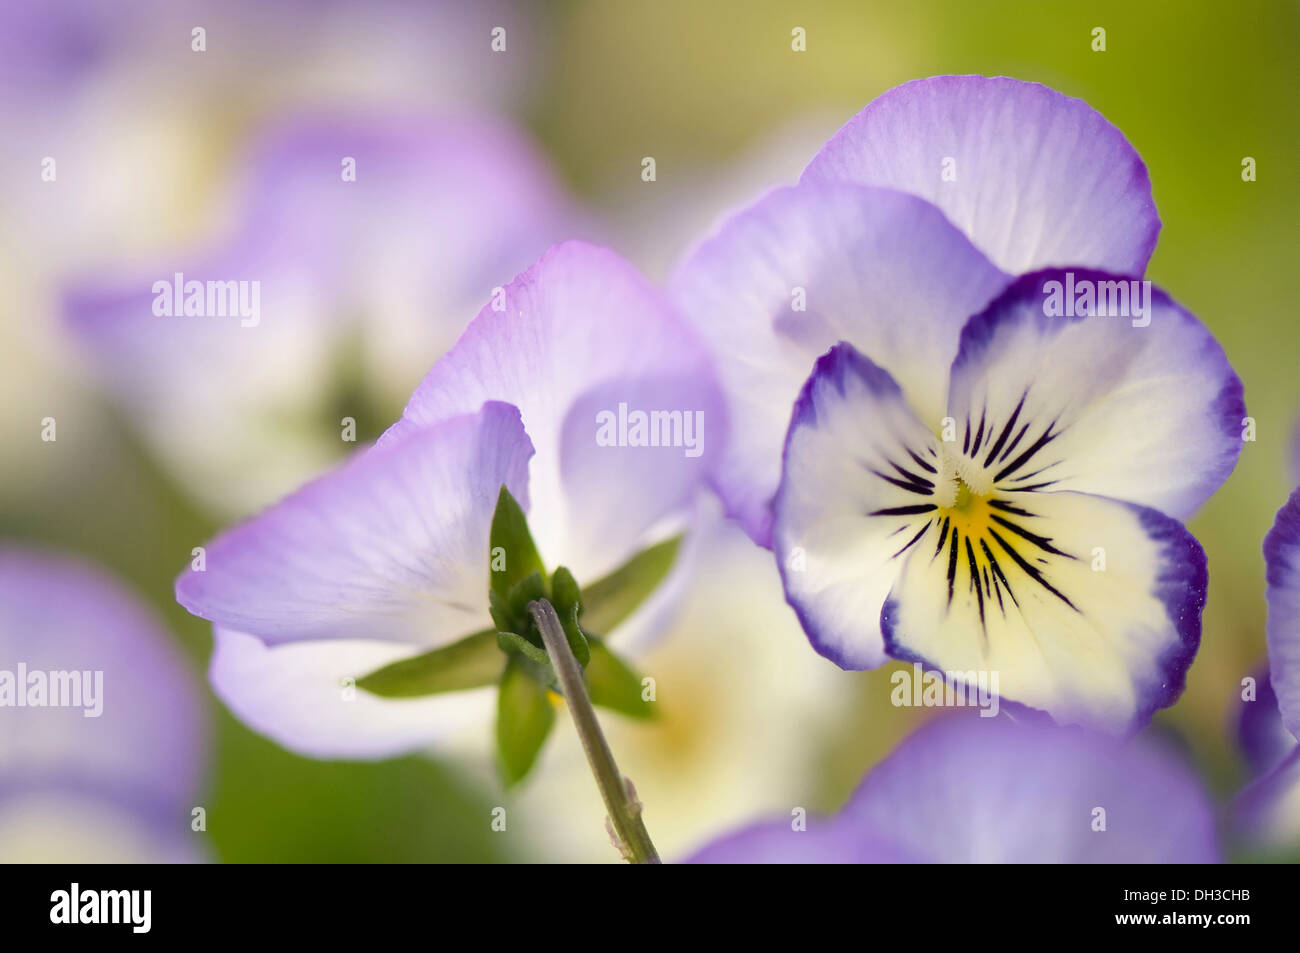 Viola with delicate cream and pale blue translucent petals and yellow eye at centre. One faced forwards, one turned away. Stock Photo